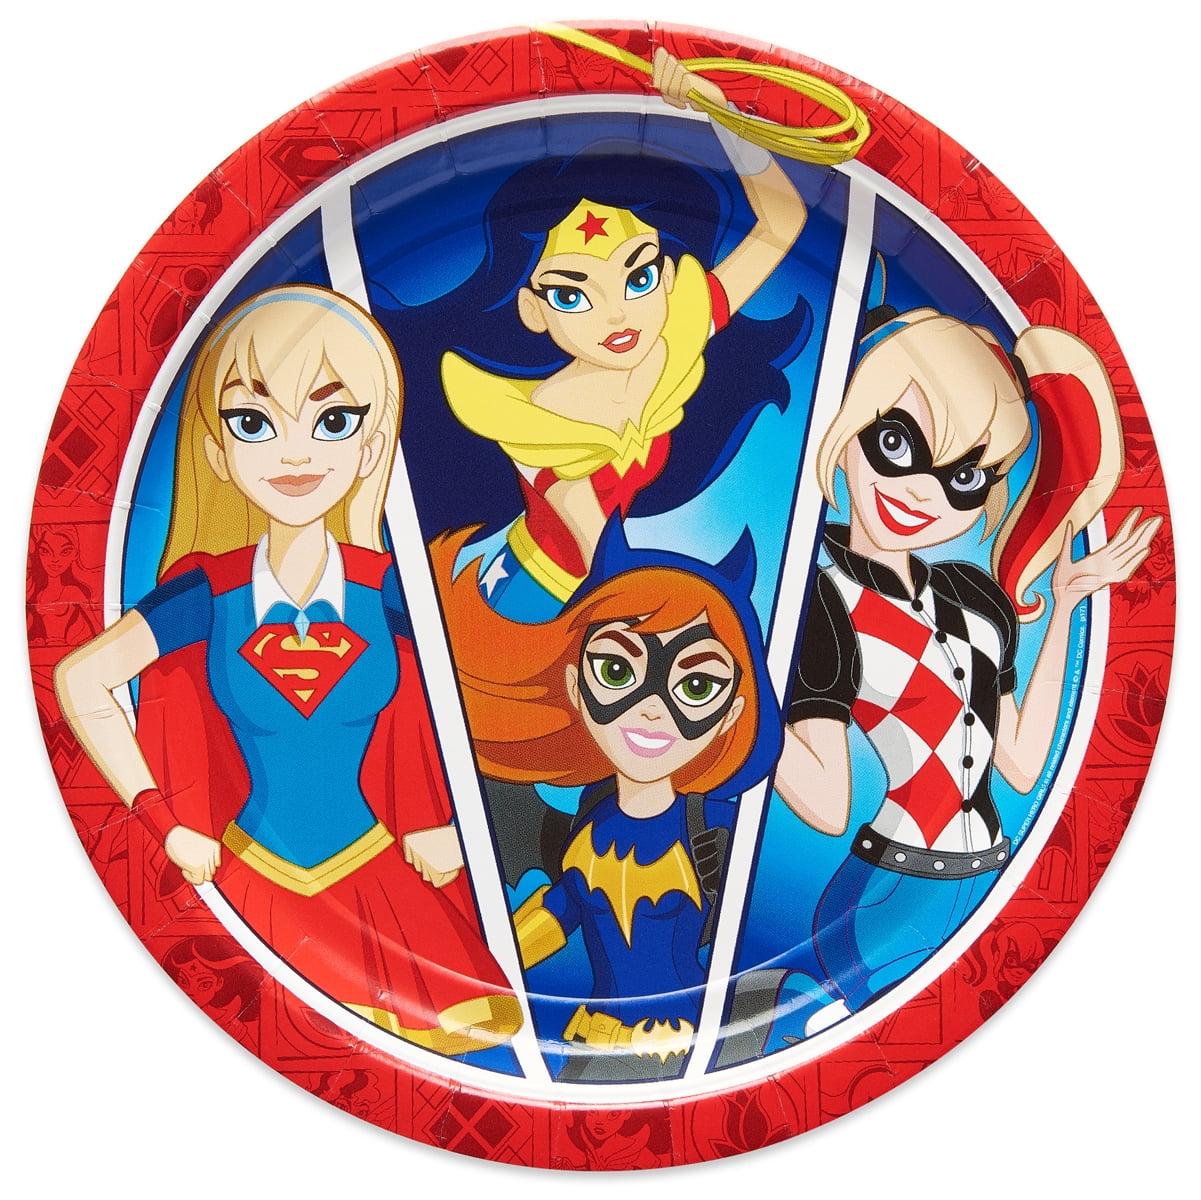 Superhero Party Supplies Batgirl and More 8 Sheets of Superhero Girls Stickers Featuring Wonder Woman DC Super Hero Girls Stickers Party Favors Bundle Supergirl